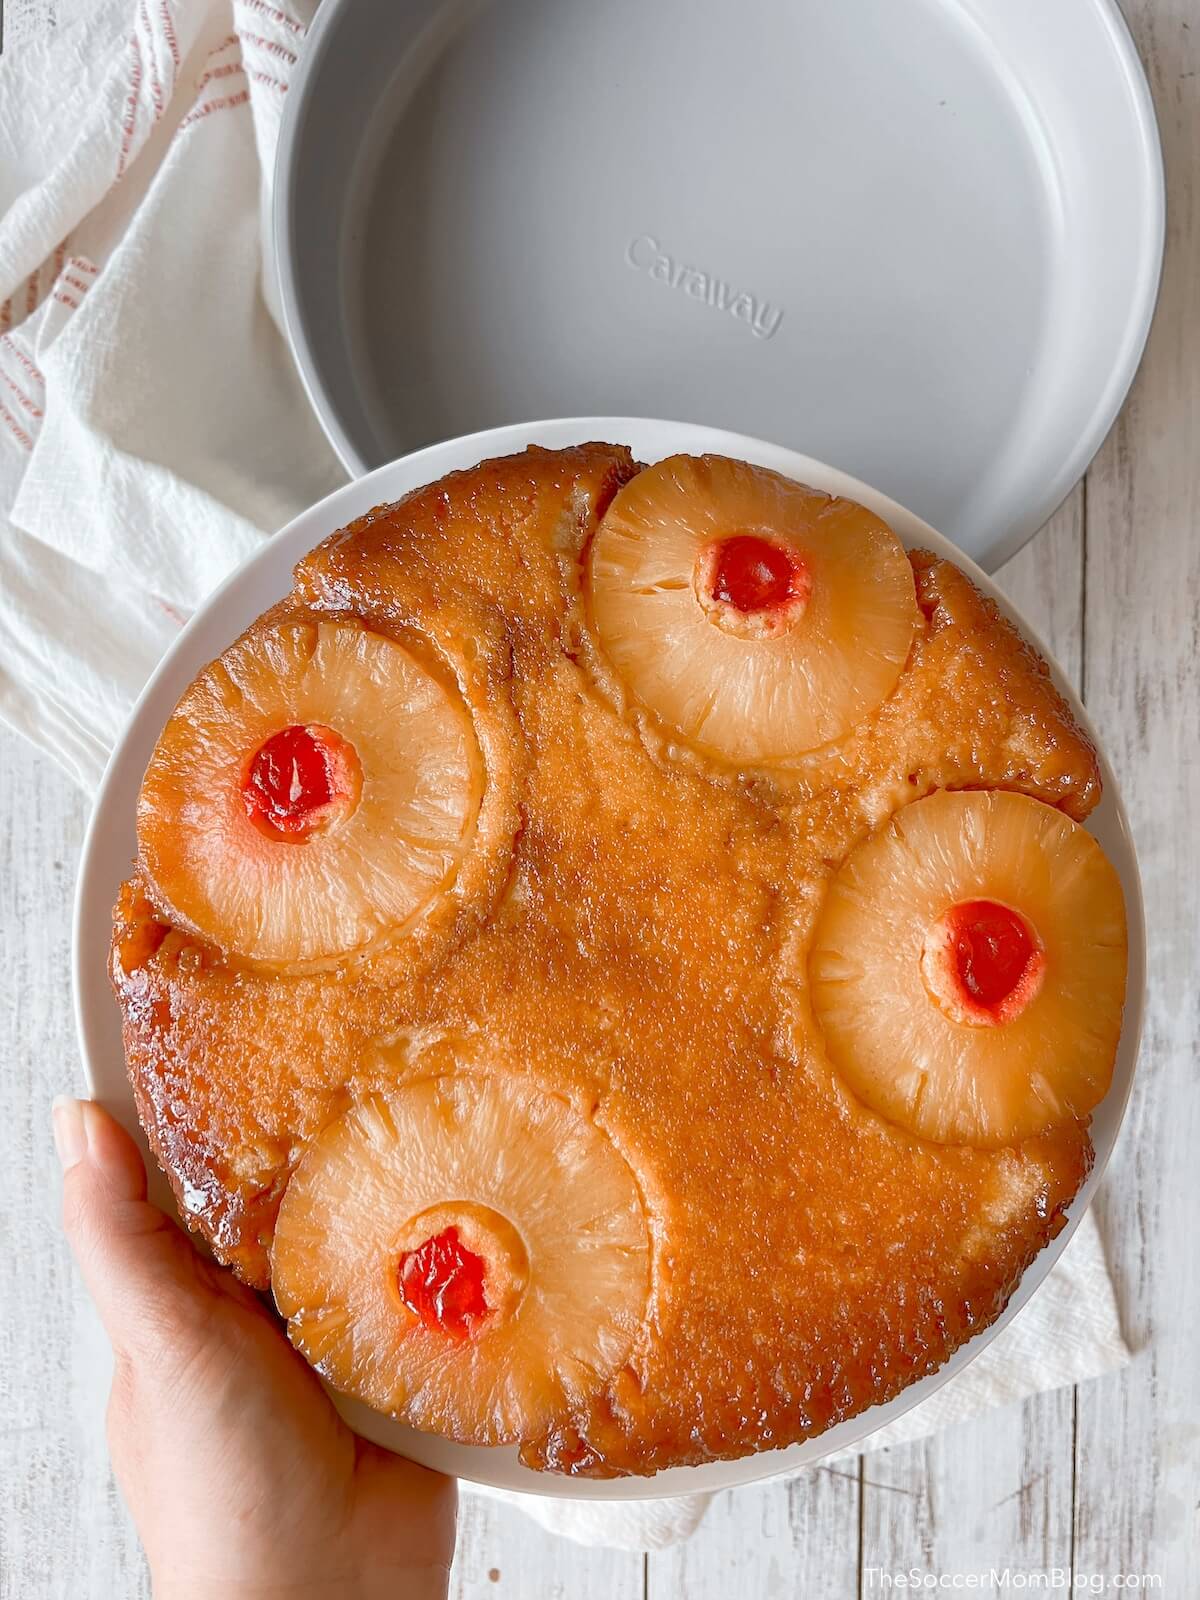 holding a pineapple upside down cake over cake pans